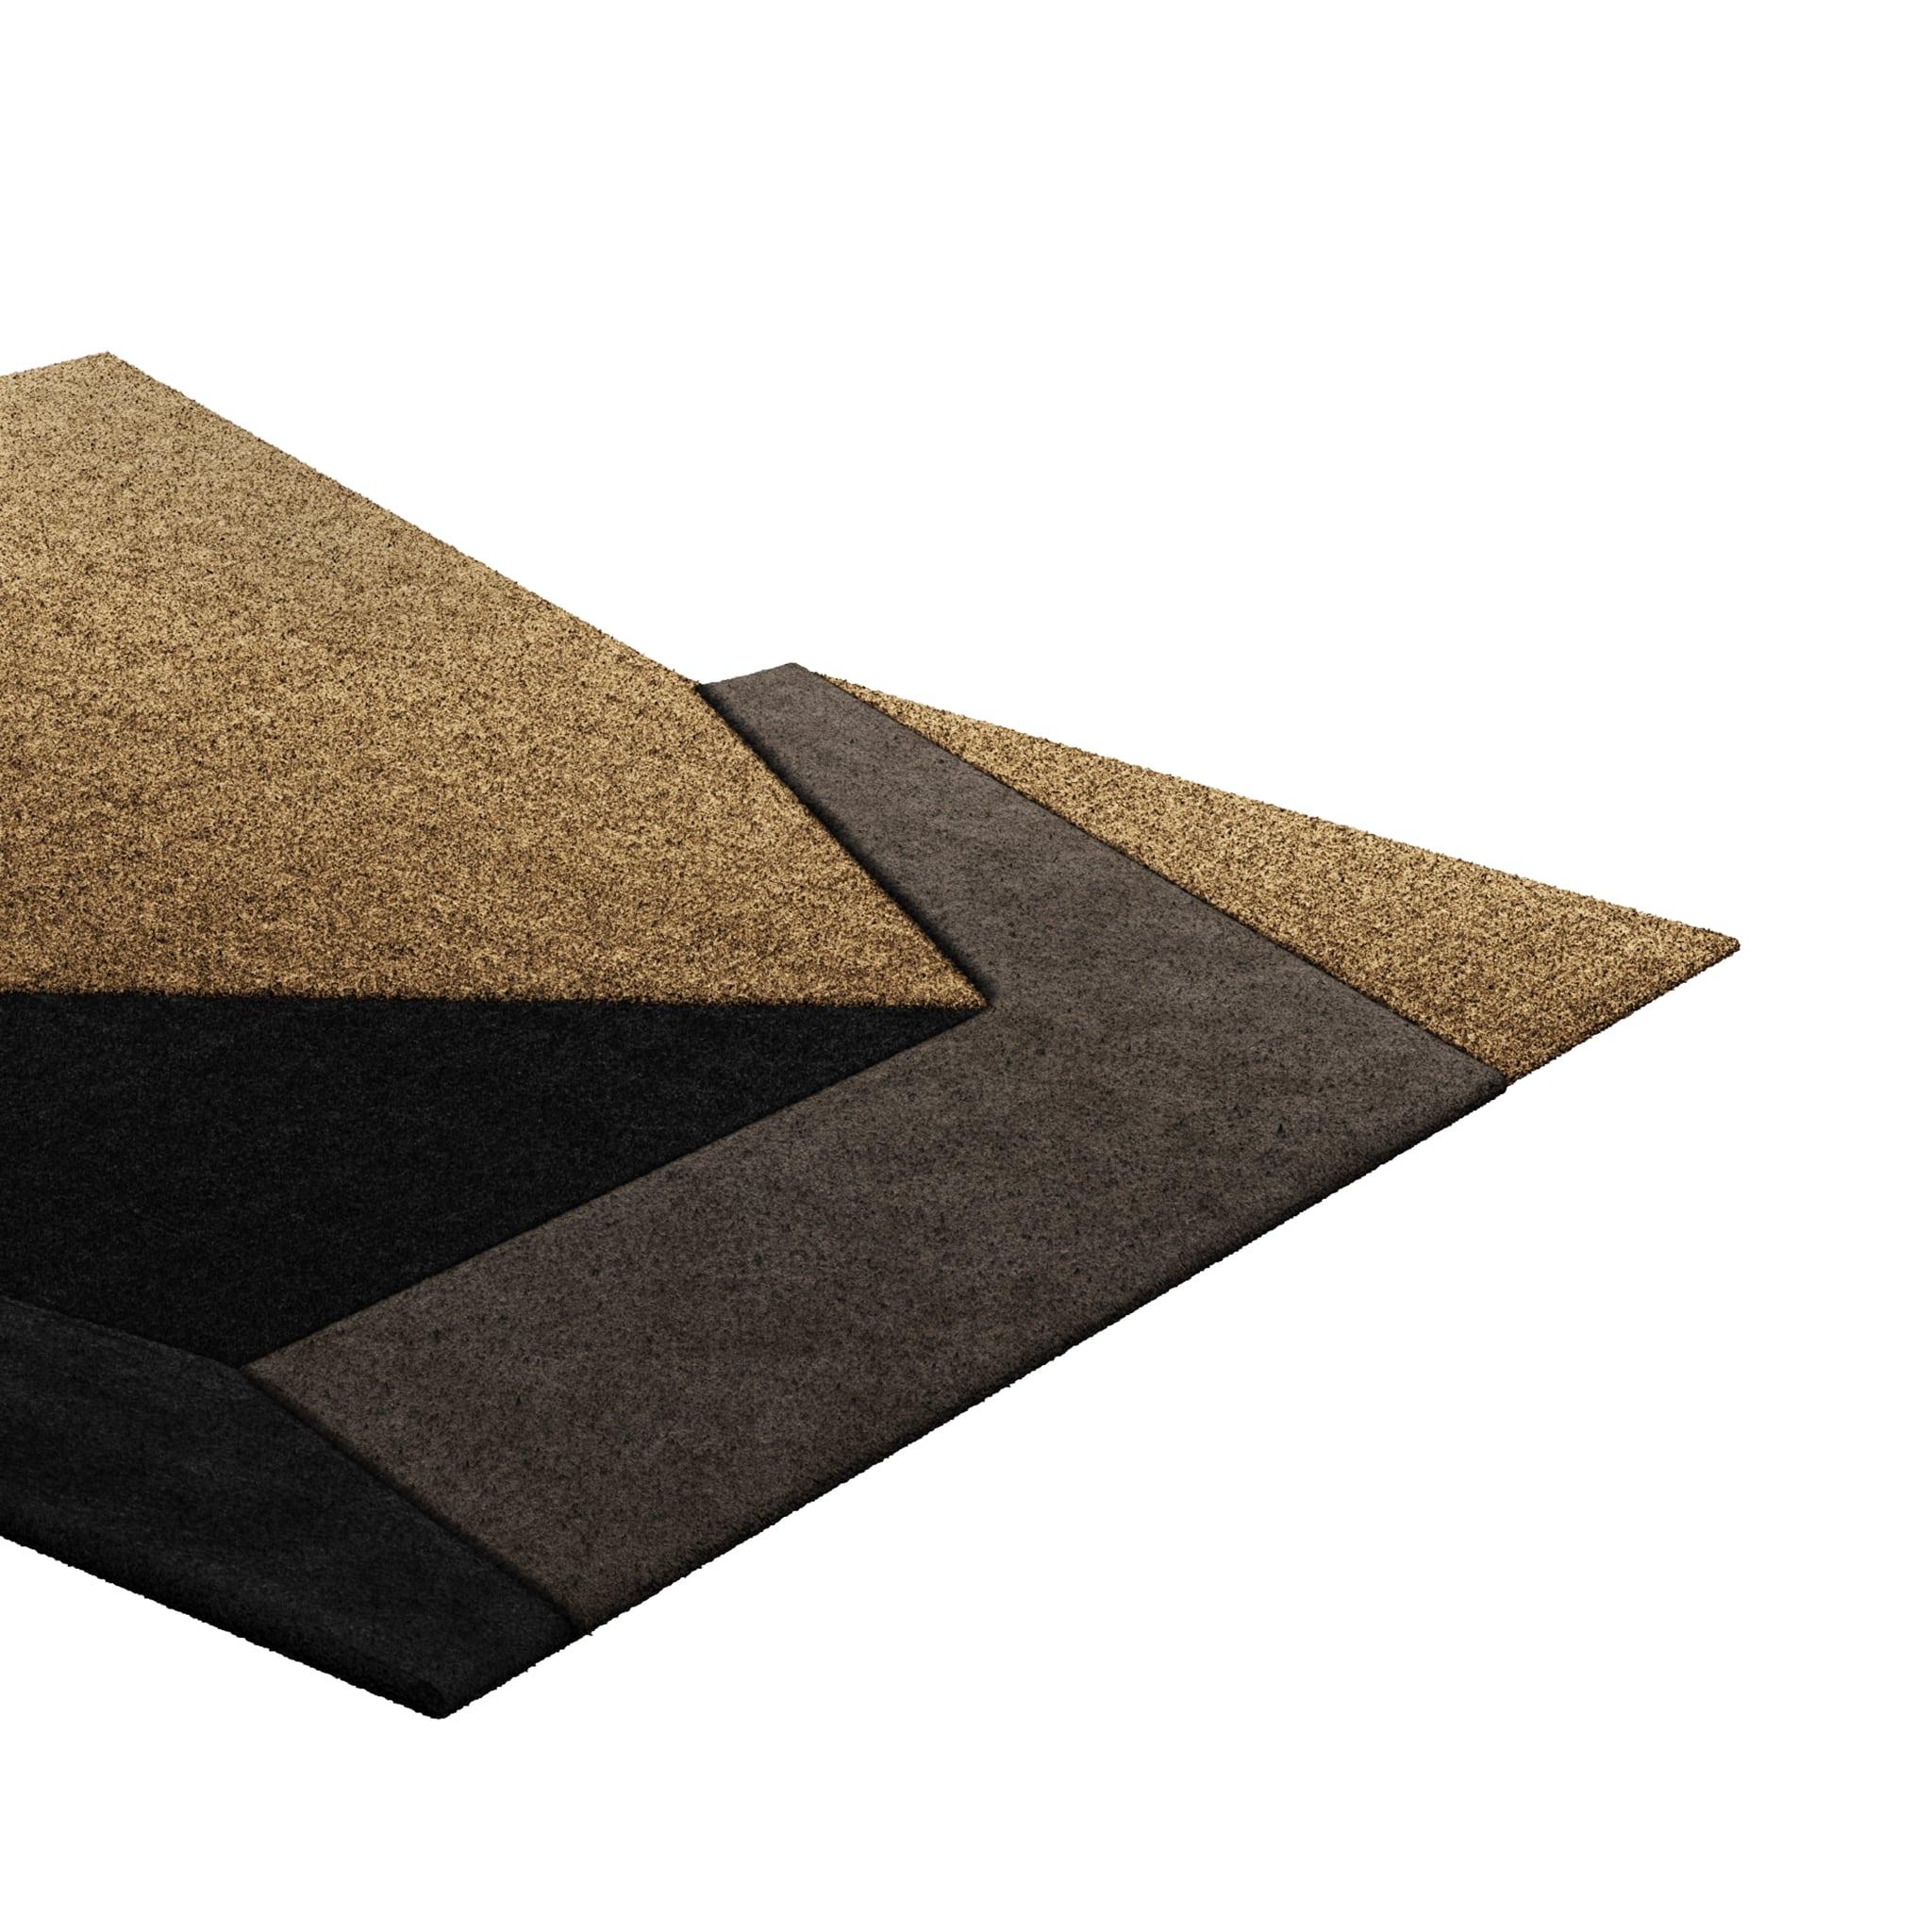 Tapis Retro #006 is a retro rug with an irregular shape and neutral colors. Inspired by architectural lines, this geometric rug makes a statement in any living space. 

Using a 3D-tufted technique that combines cut and loop pile, the retro rug with